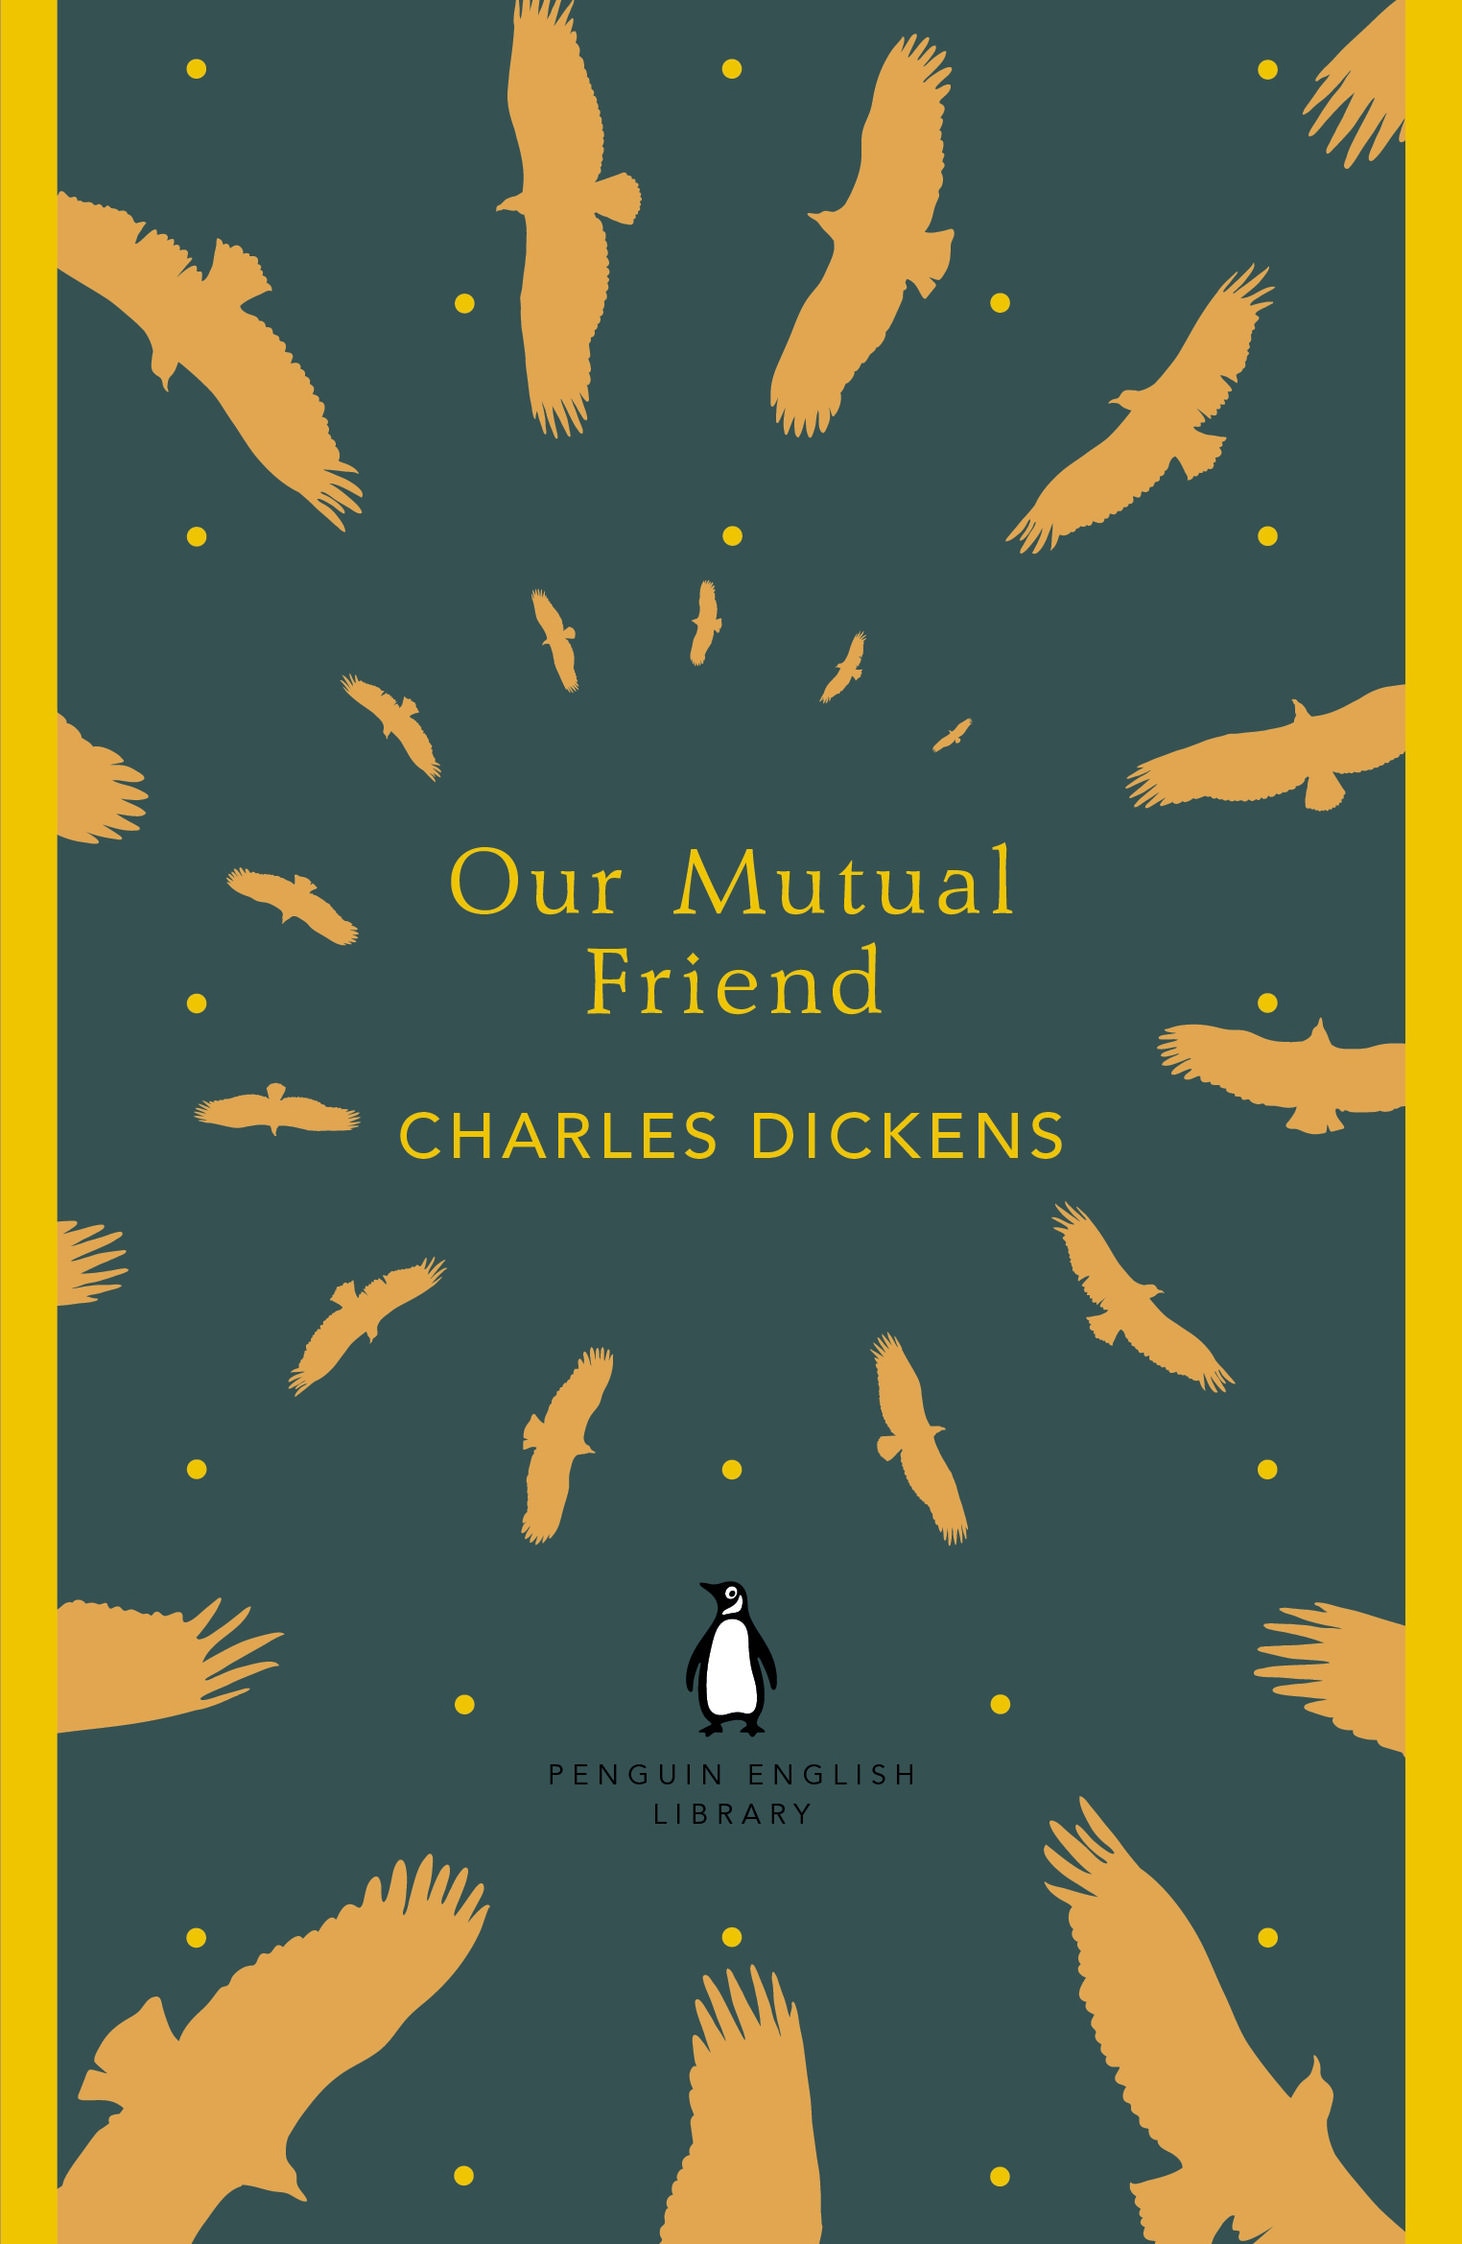 Are these books ours. Our mutual friend. Our mutual friend book. Dickens c. "our mutual friend". Английская литература Penguin.